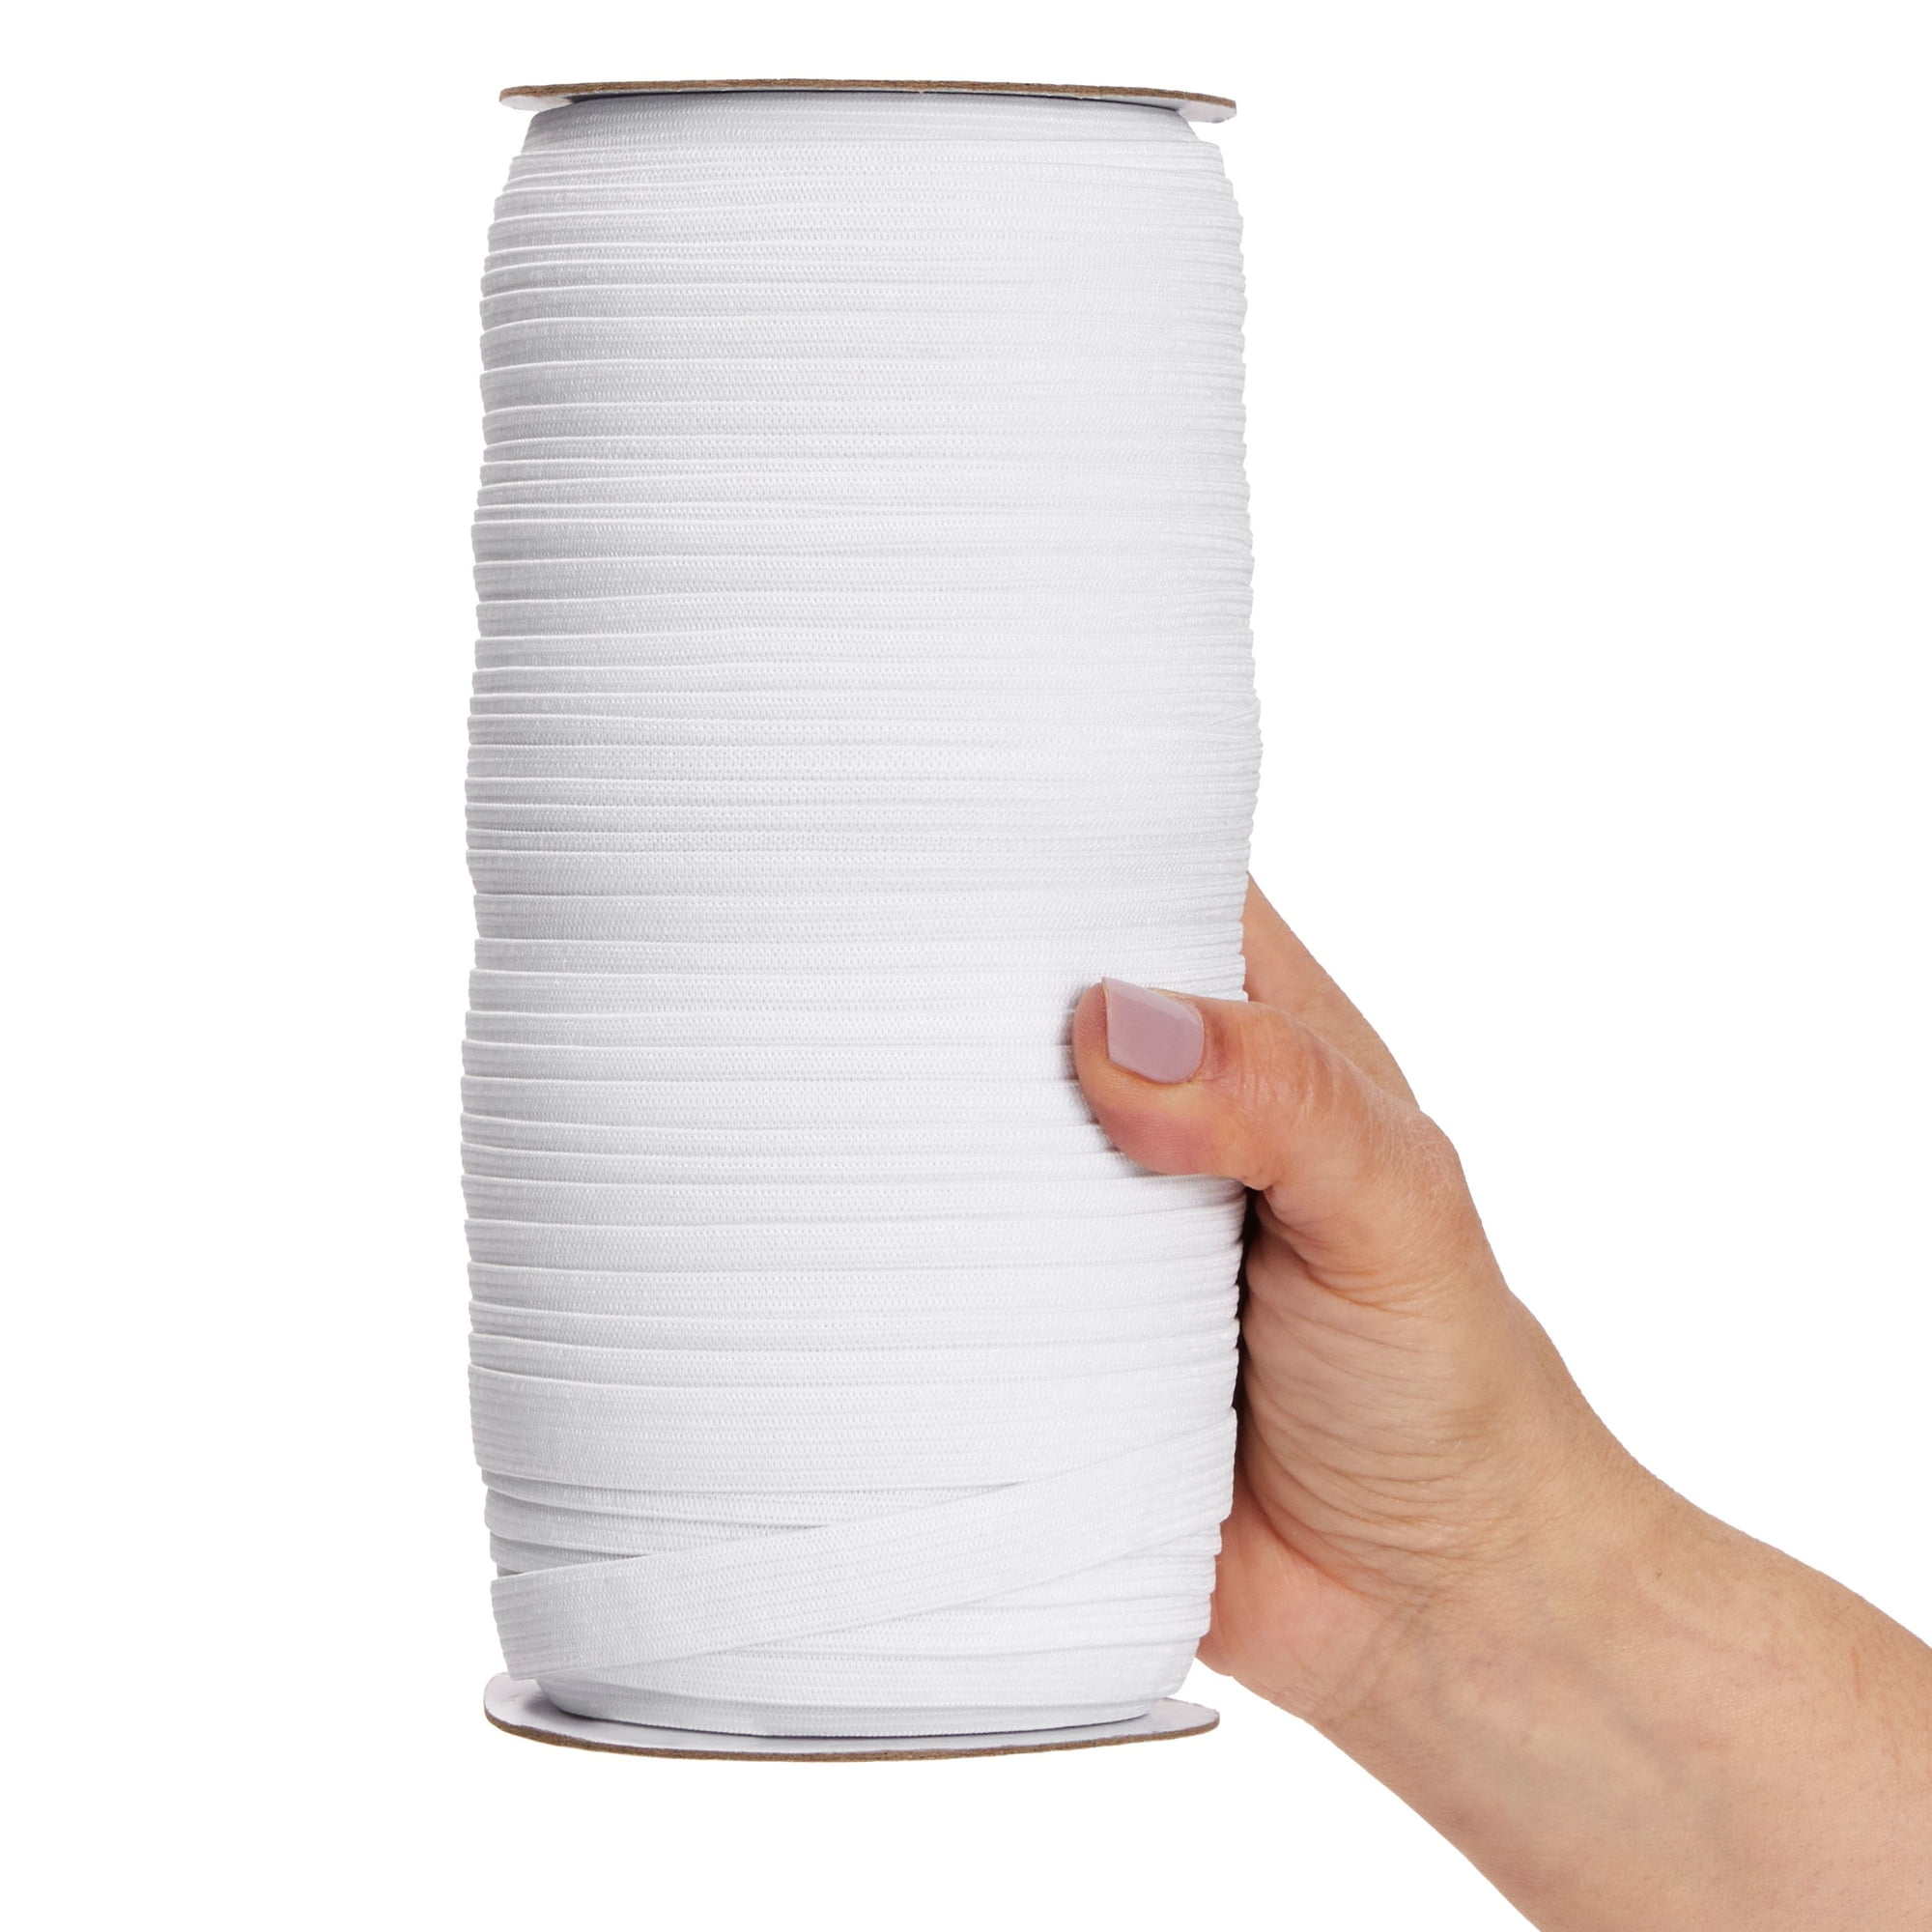 HANFINEE 1-1/2 inch Wide Sew on Elastic Band Knitted Elastic with Heavy Stretch for Sewing Crafts DIY,Waistband,Bedspread,Cuff (White,15 Yards)